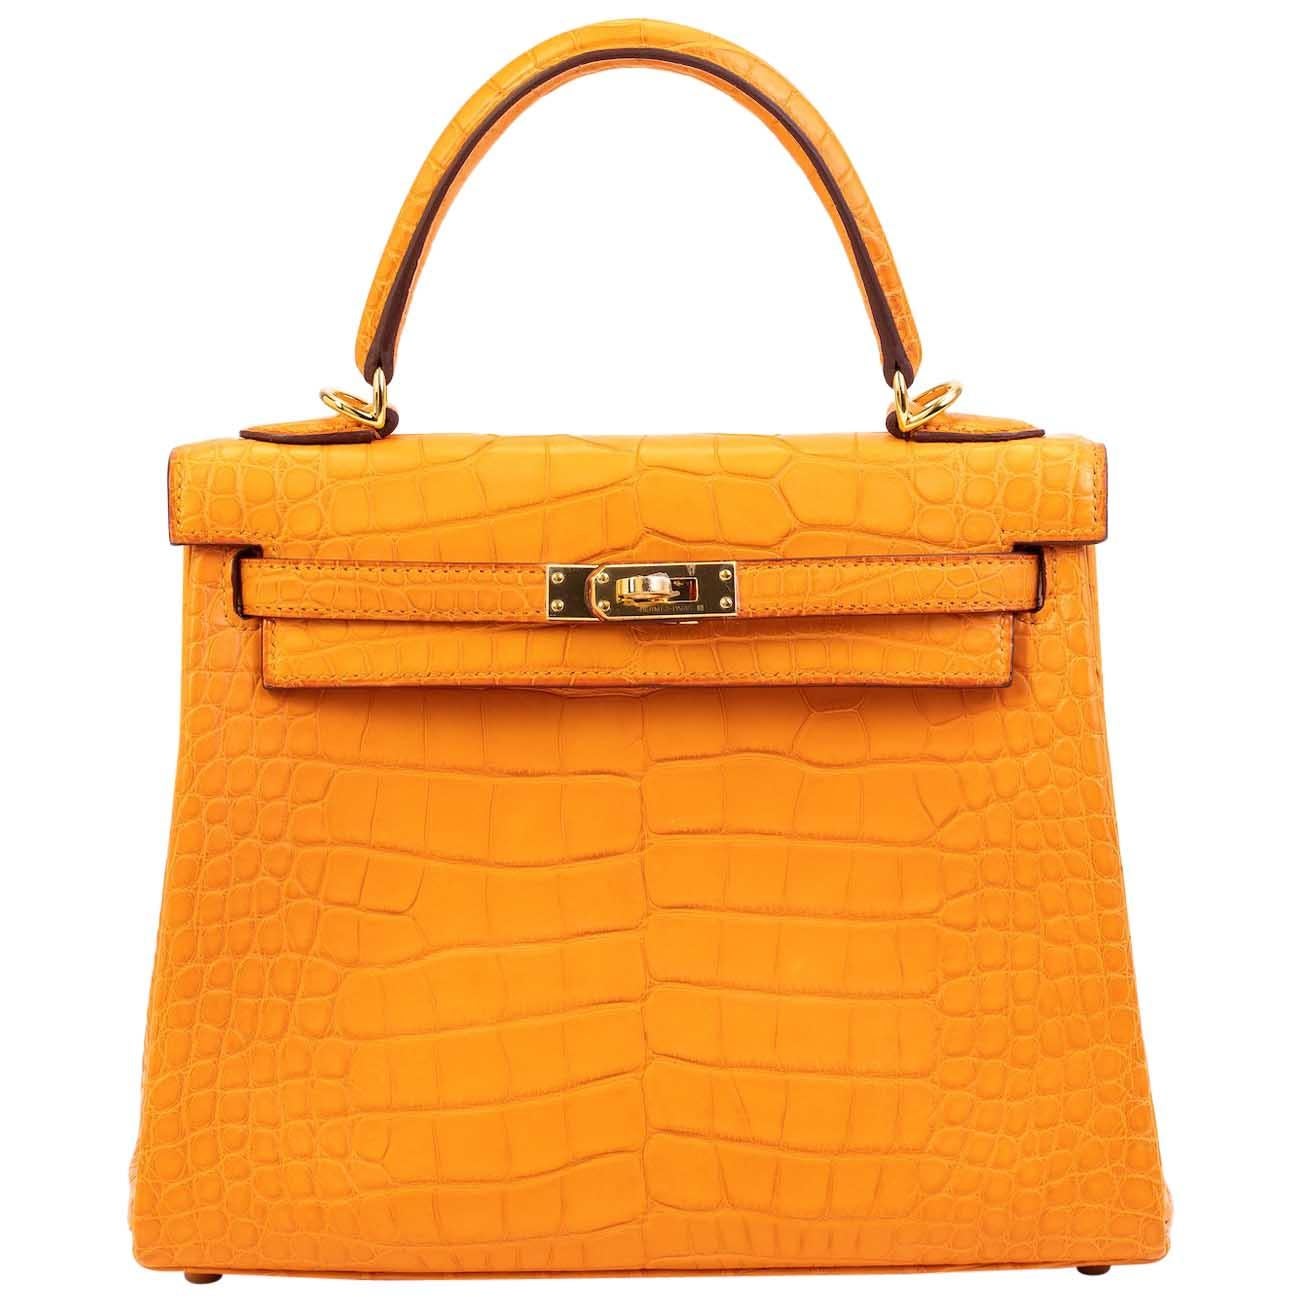 Hermes Kelly 25cm Abricot Alligator with Gold hardware